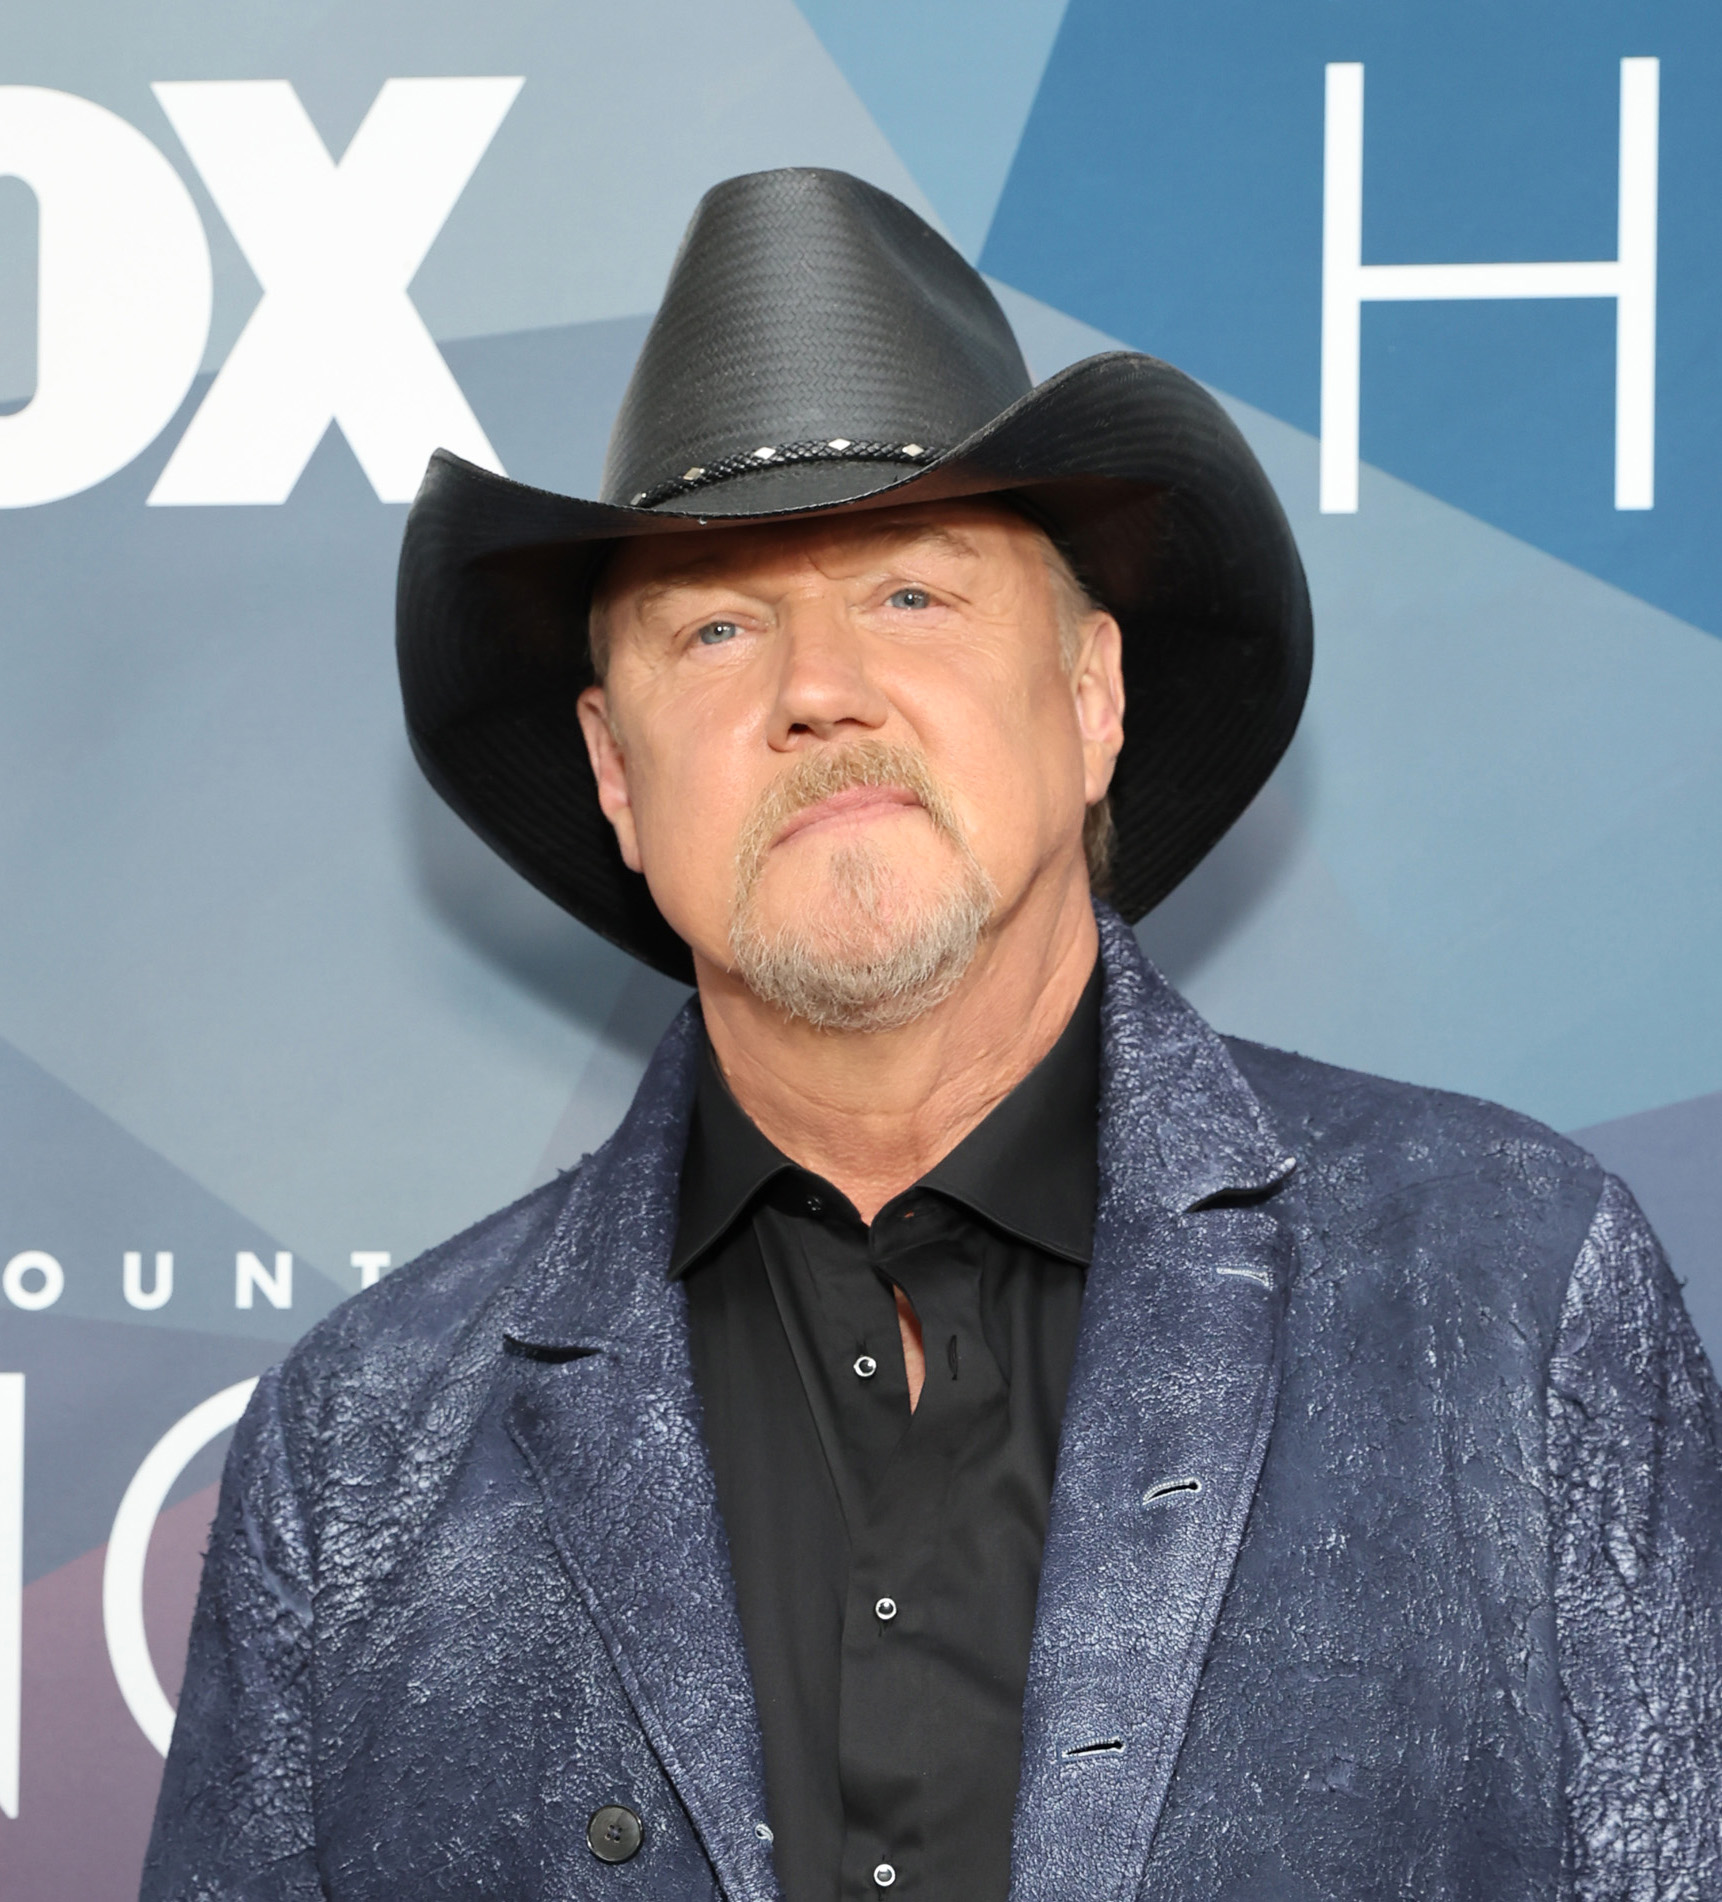 Trace Adkins at the 15th Annual Academy of Country Music Honors on August 24, 2022, in Nashville, Tennessee. | Source: Getty Images